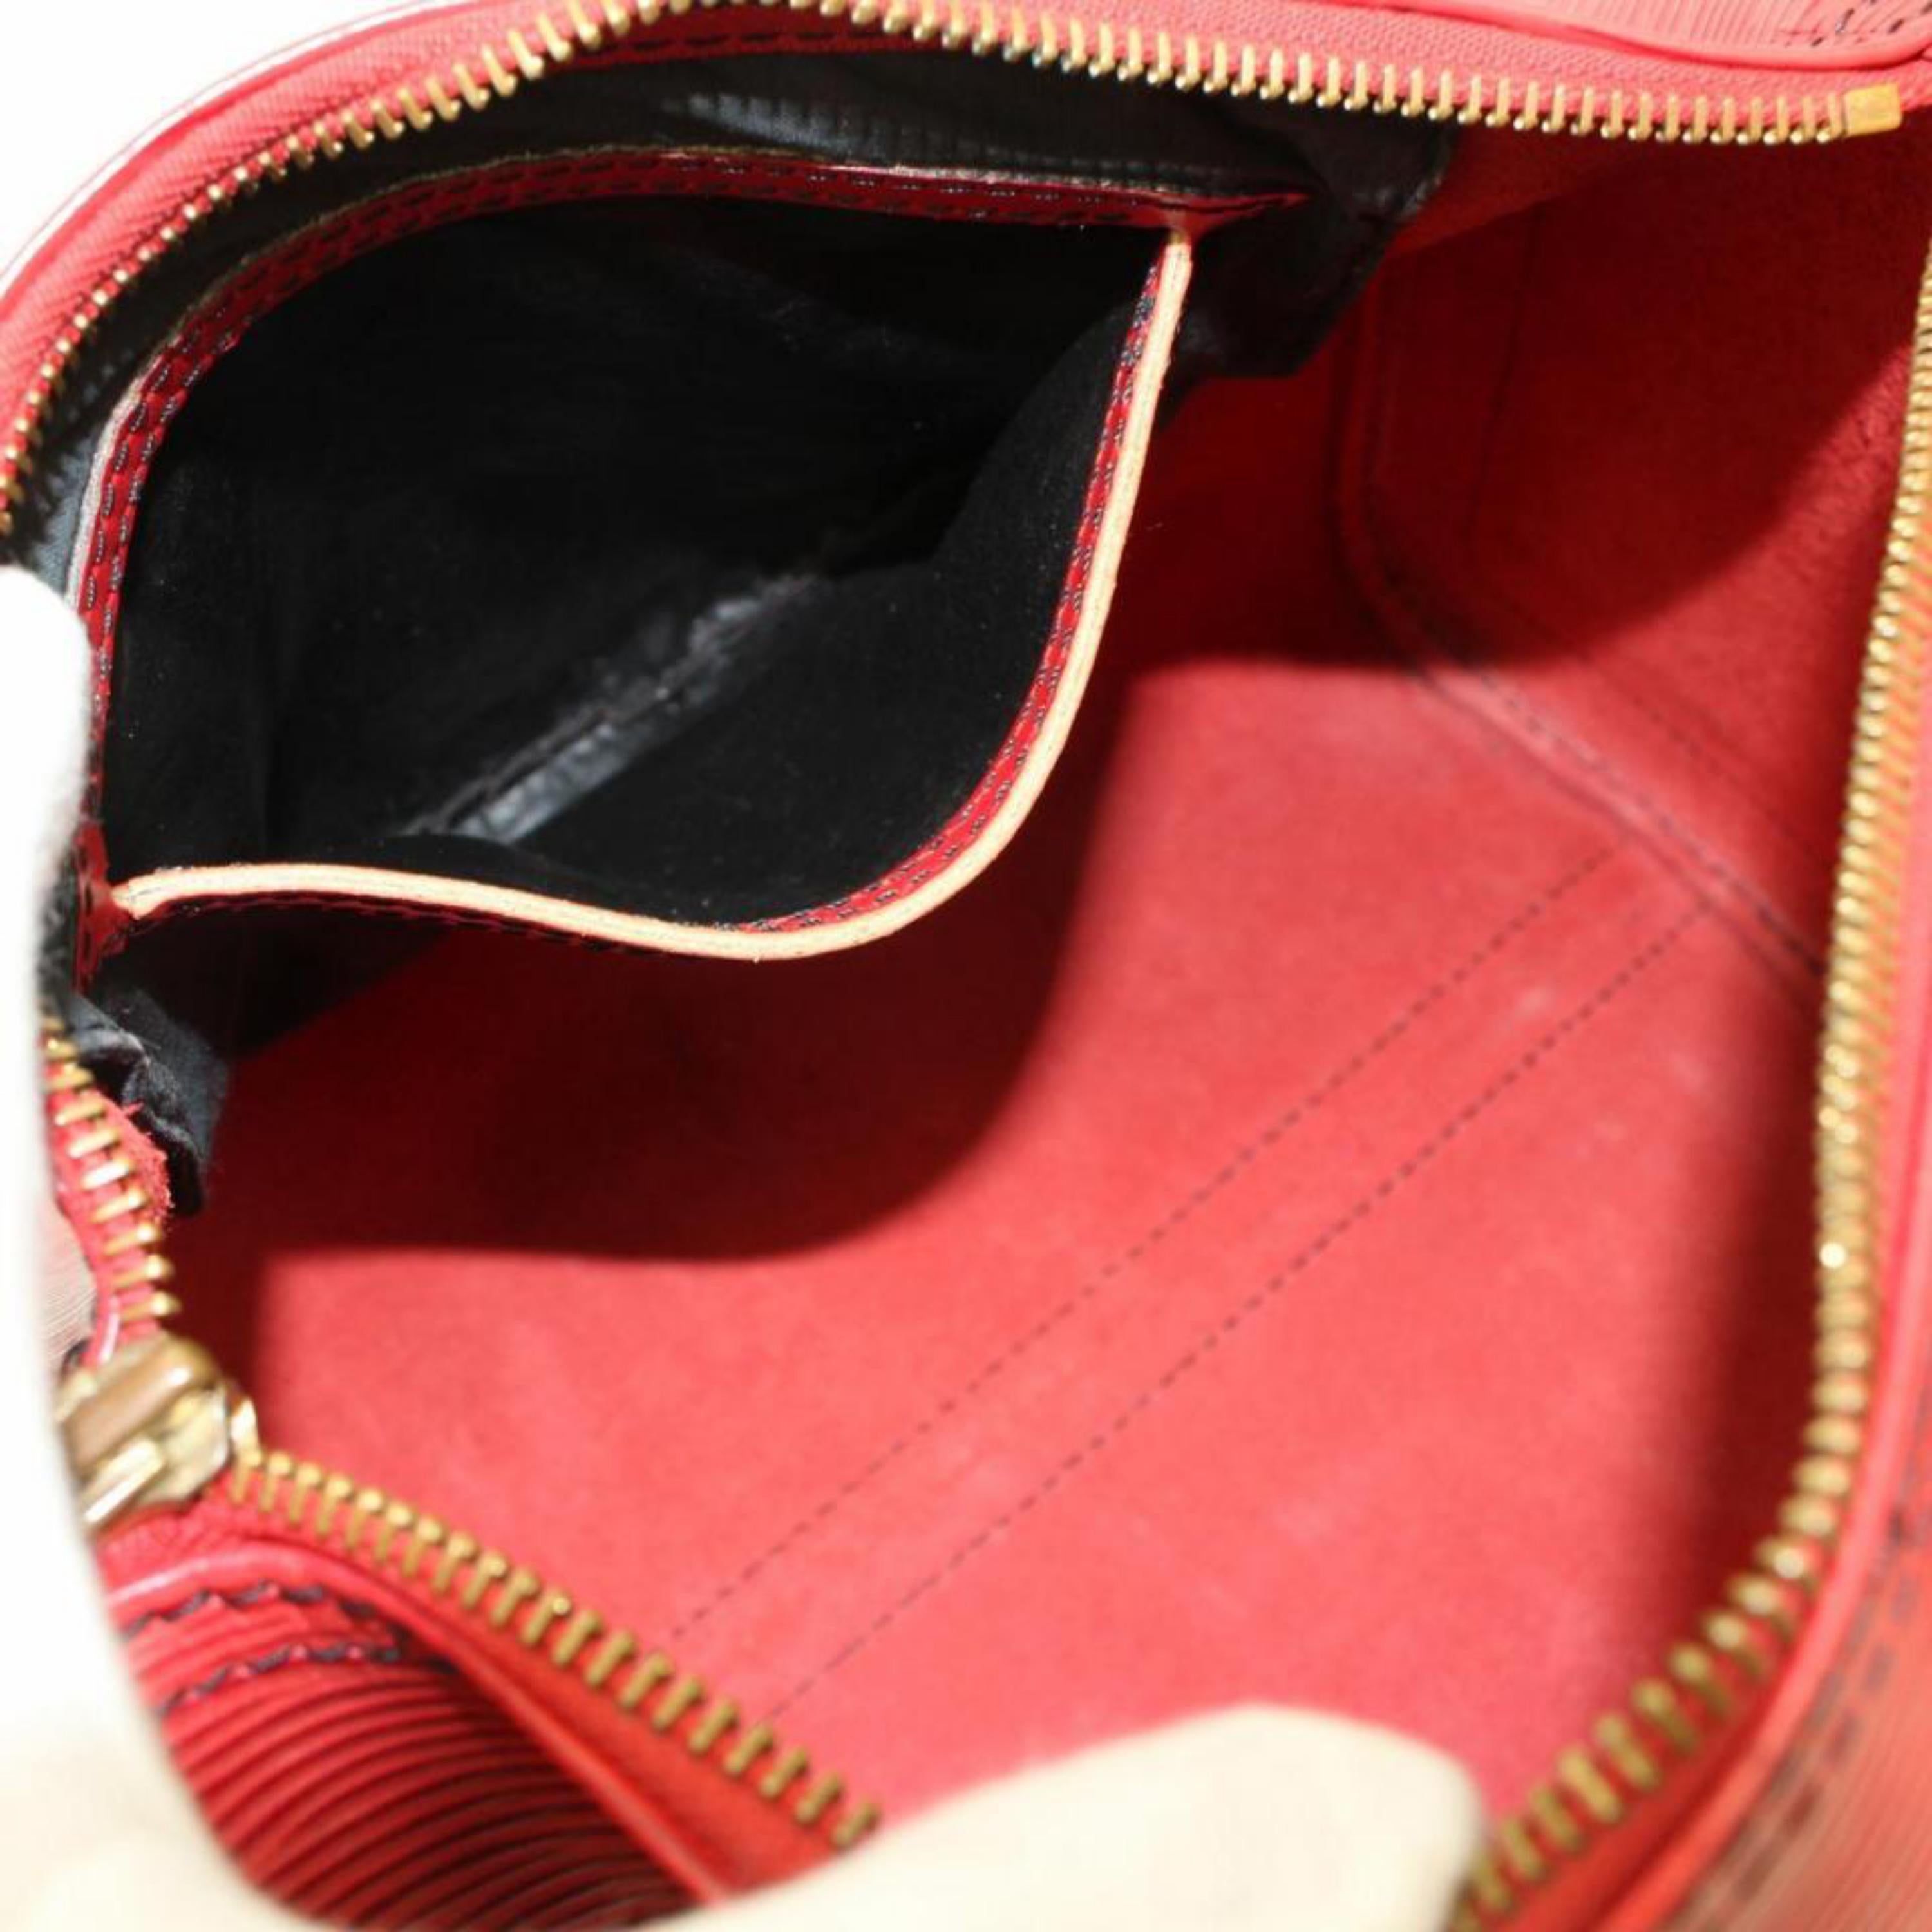 Louis Vuitton Speedy Epi 25 868169 Red Leather Satchel In Good Condition For Sale In Forest Hills, NY